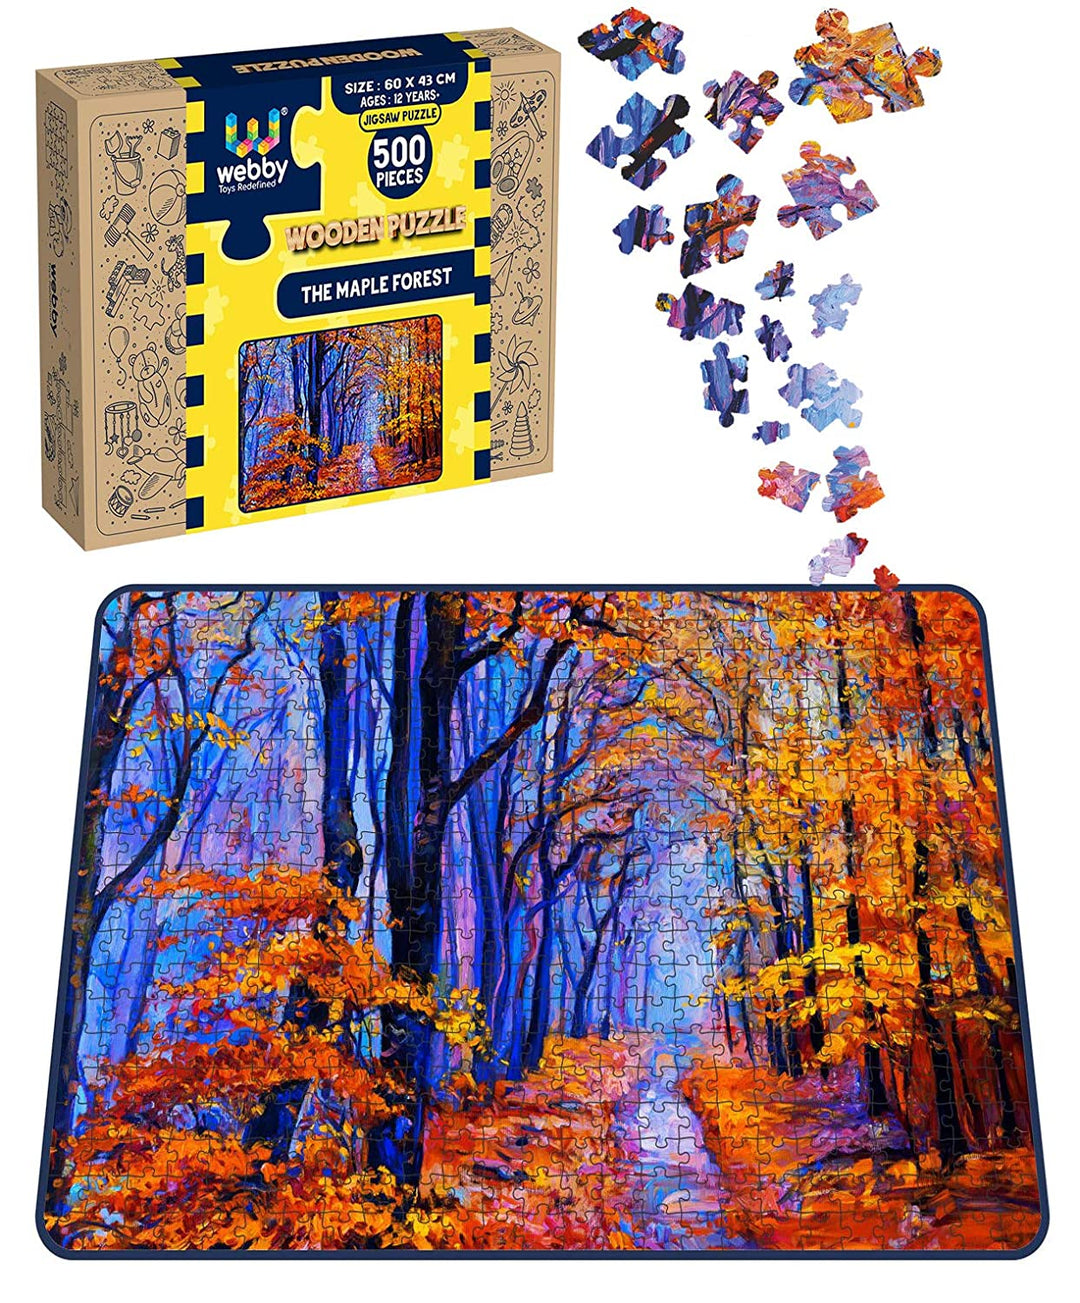 Webby The Maple Forest Wooden Jigsaw Puzzle, 500 pieces